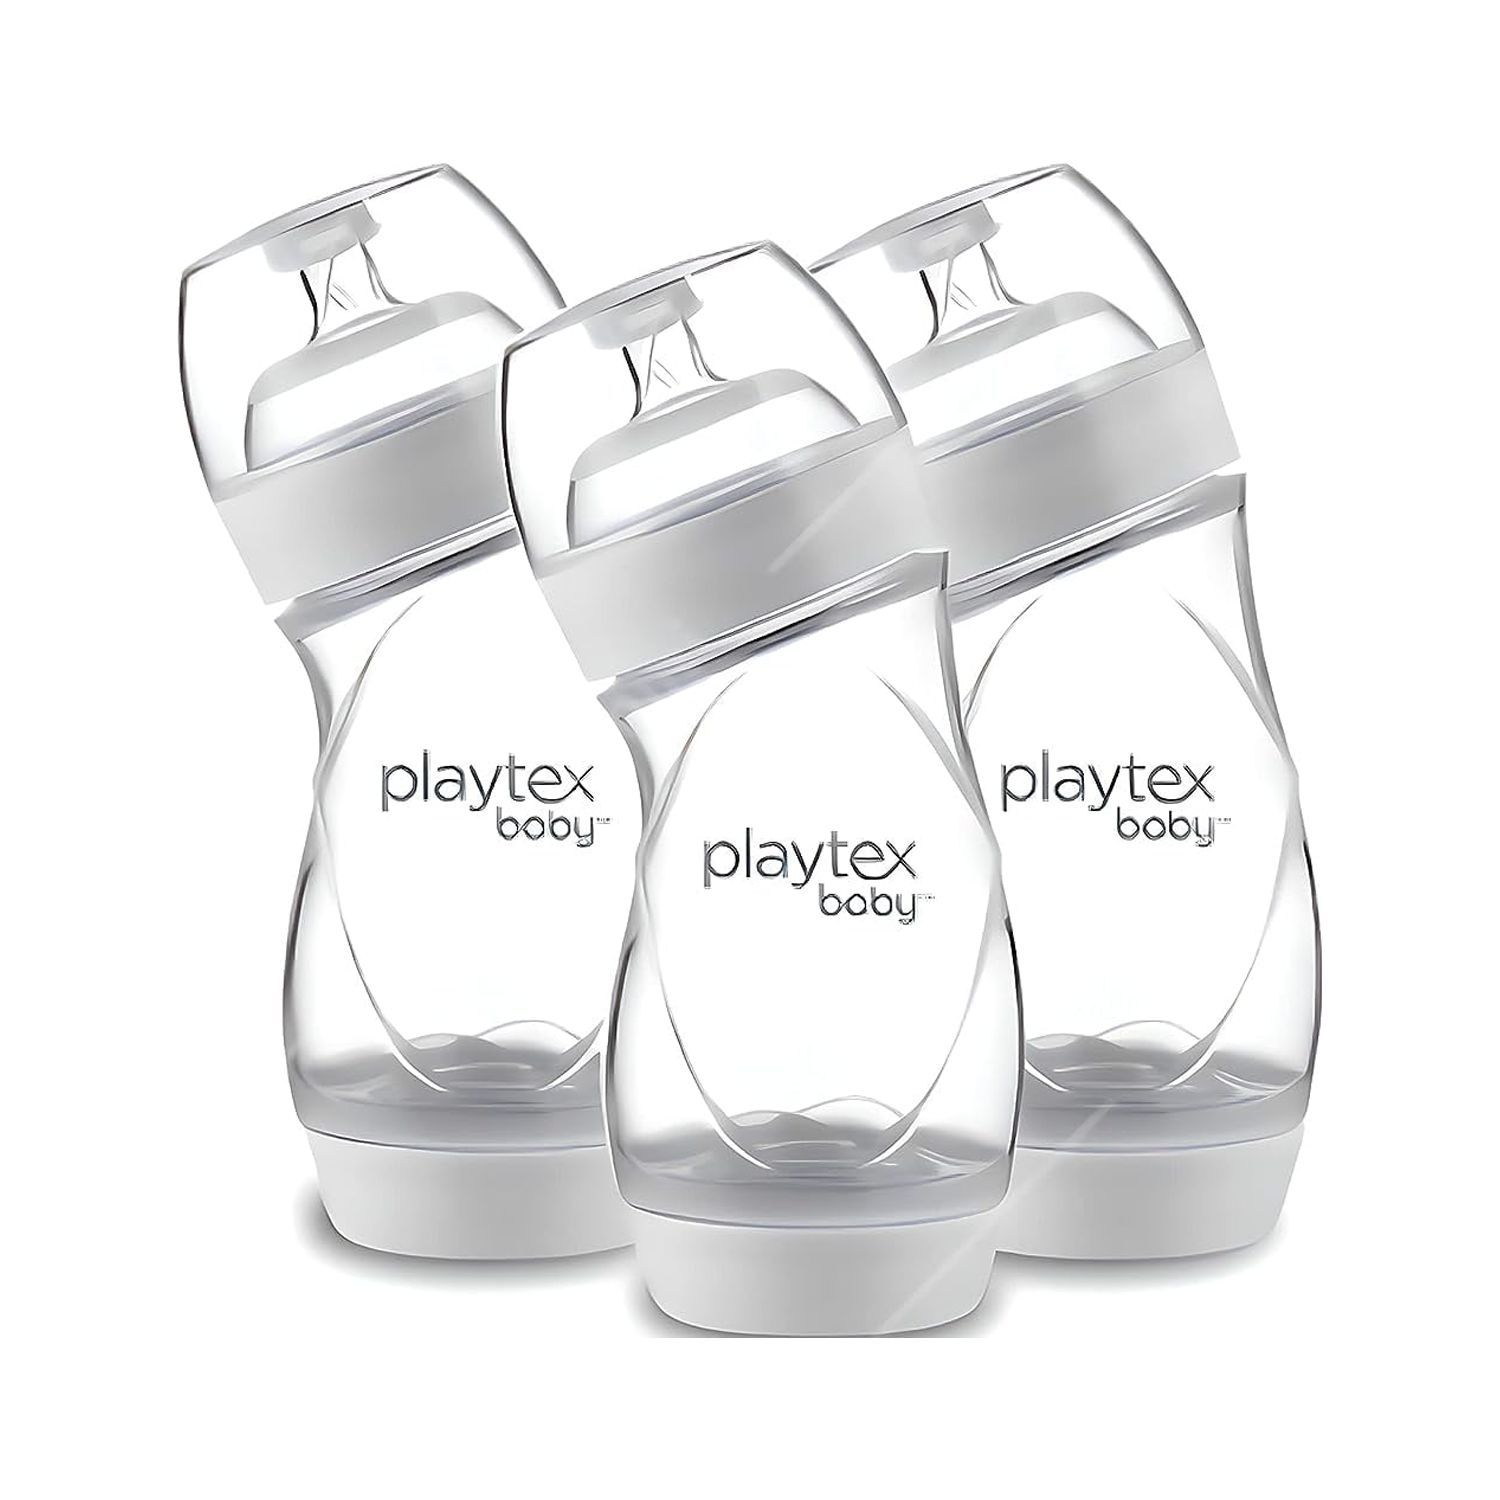 Playtex Baby Ventaire Bottle, Helps Prevent Colic & Reflux, 9 Ounce Bottles, 3 Count 9 Ounce - 3 Pack - image 1 of 18